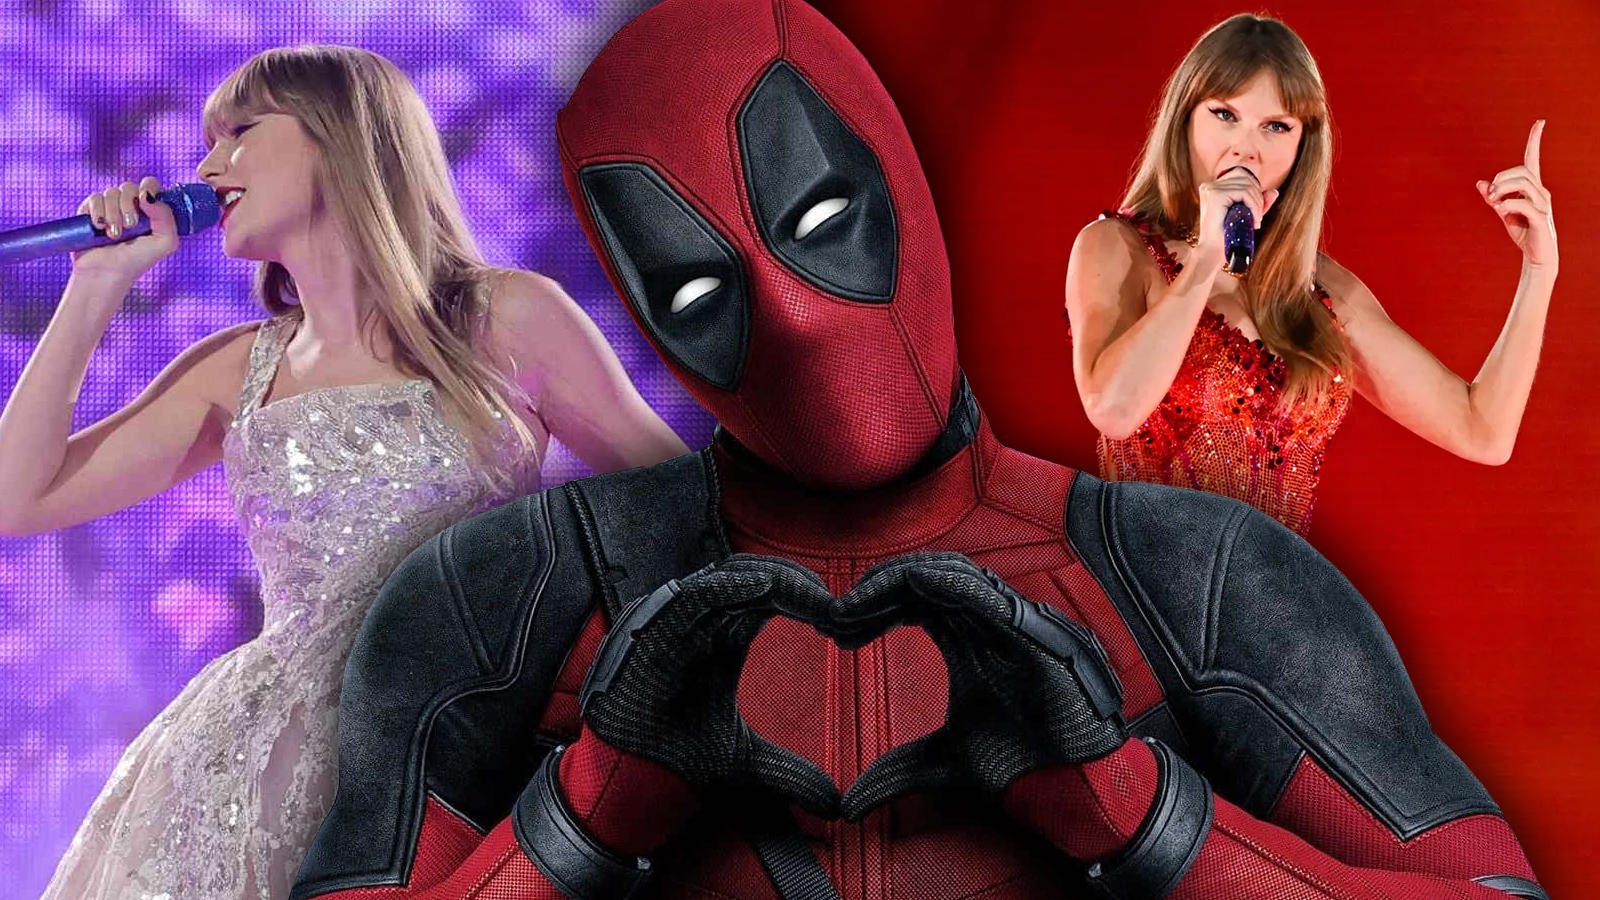 Key art for Deadpool combined with stills from Taylor Swift's Eras tour